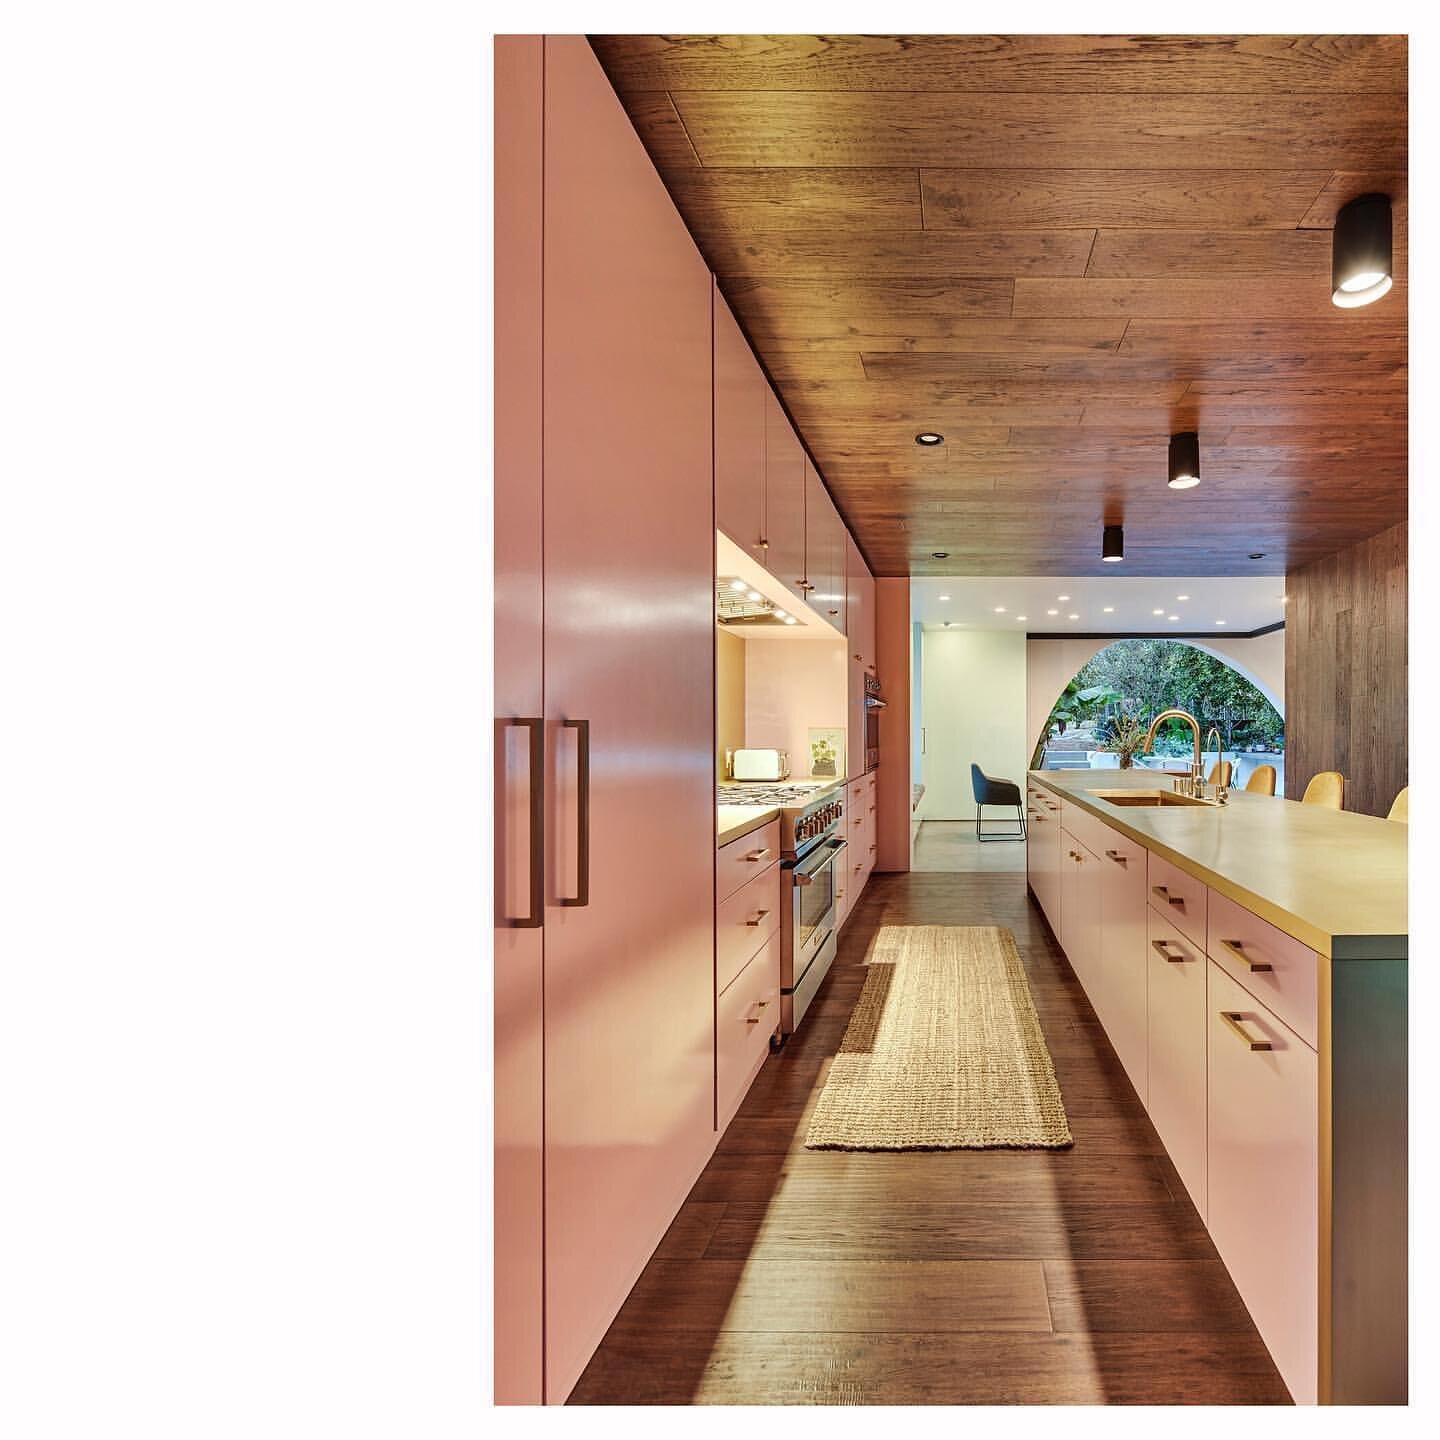 The &ldquo;wood womb&rdquo; (walls, ceiling and floor) of the kitchen in the El Sereno Residence by @hsumccullough compliment the pink cabinets and brass island and backsplash. The dining room, kitchen and living room combine to create a 60 feet long